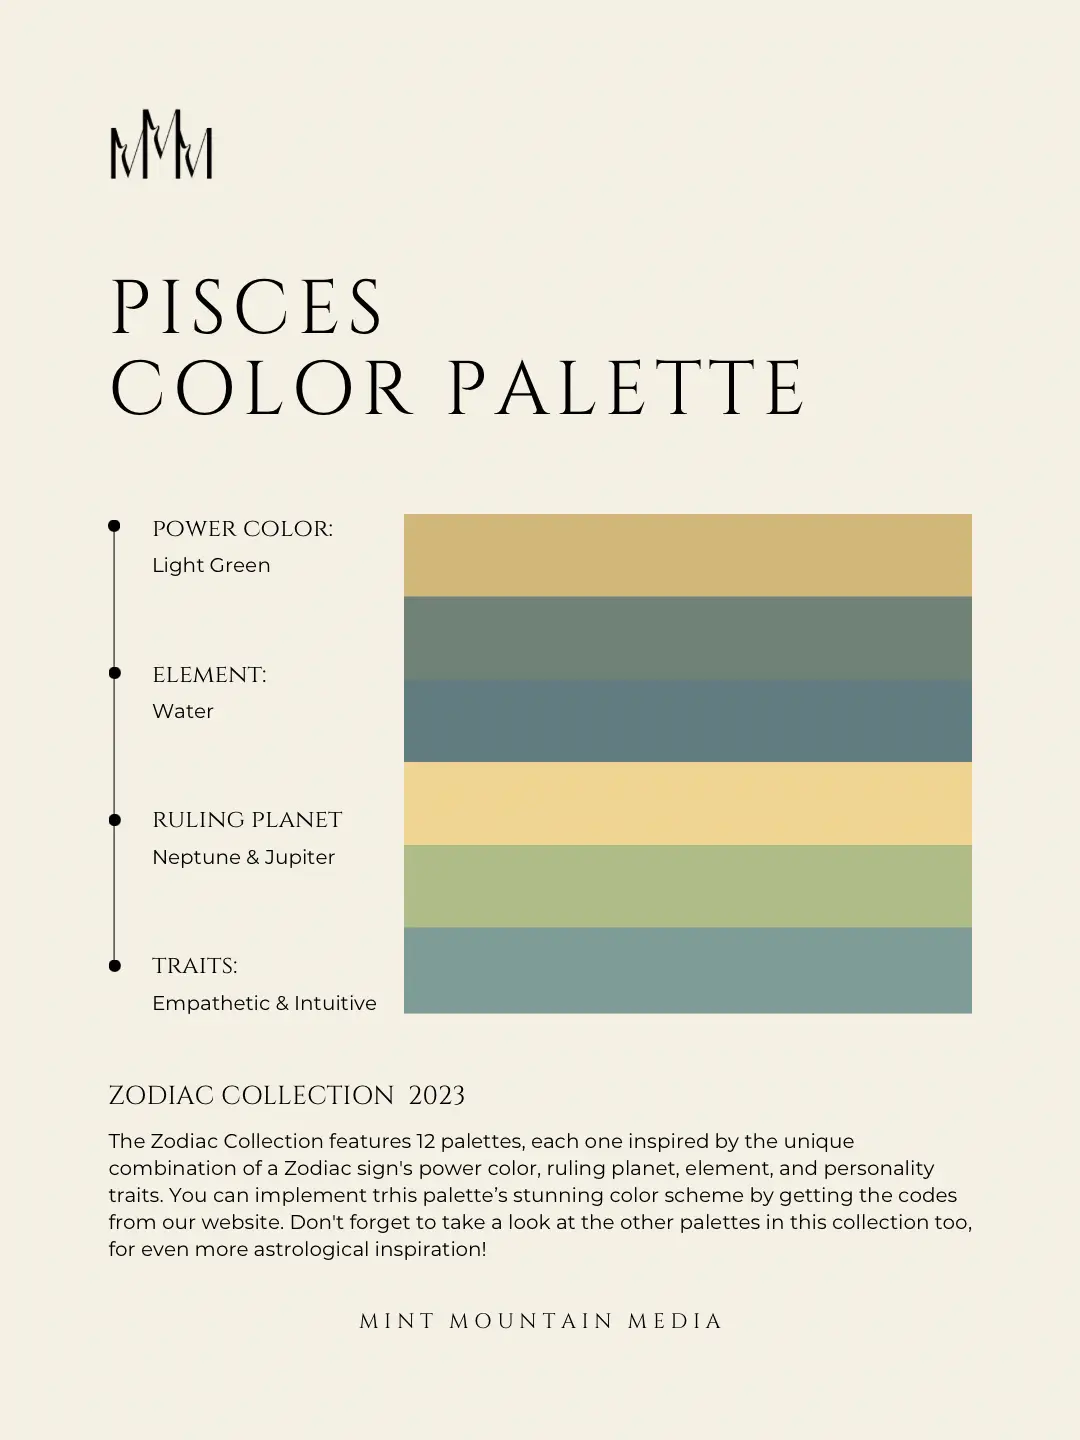 Color Palette for Pisces-Inspired Athleisure - Lemon8 Search